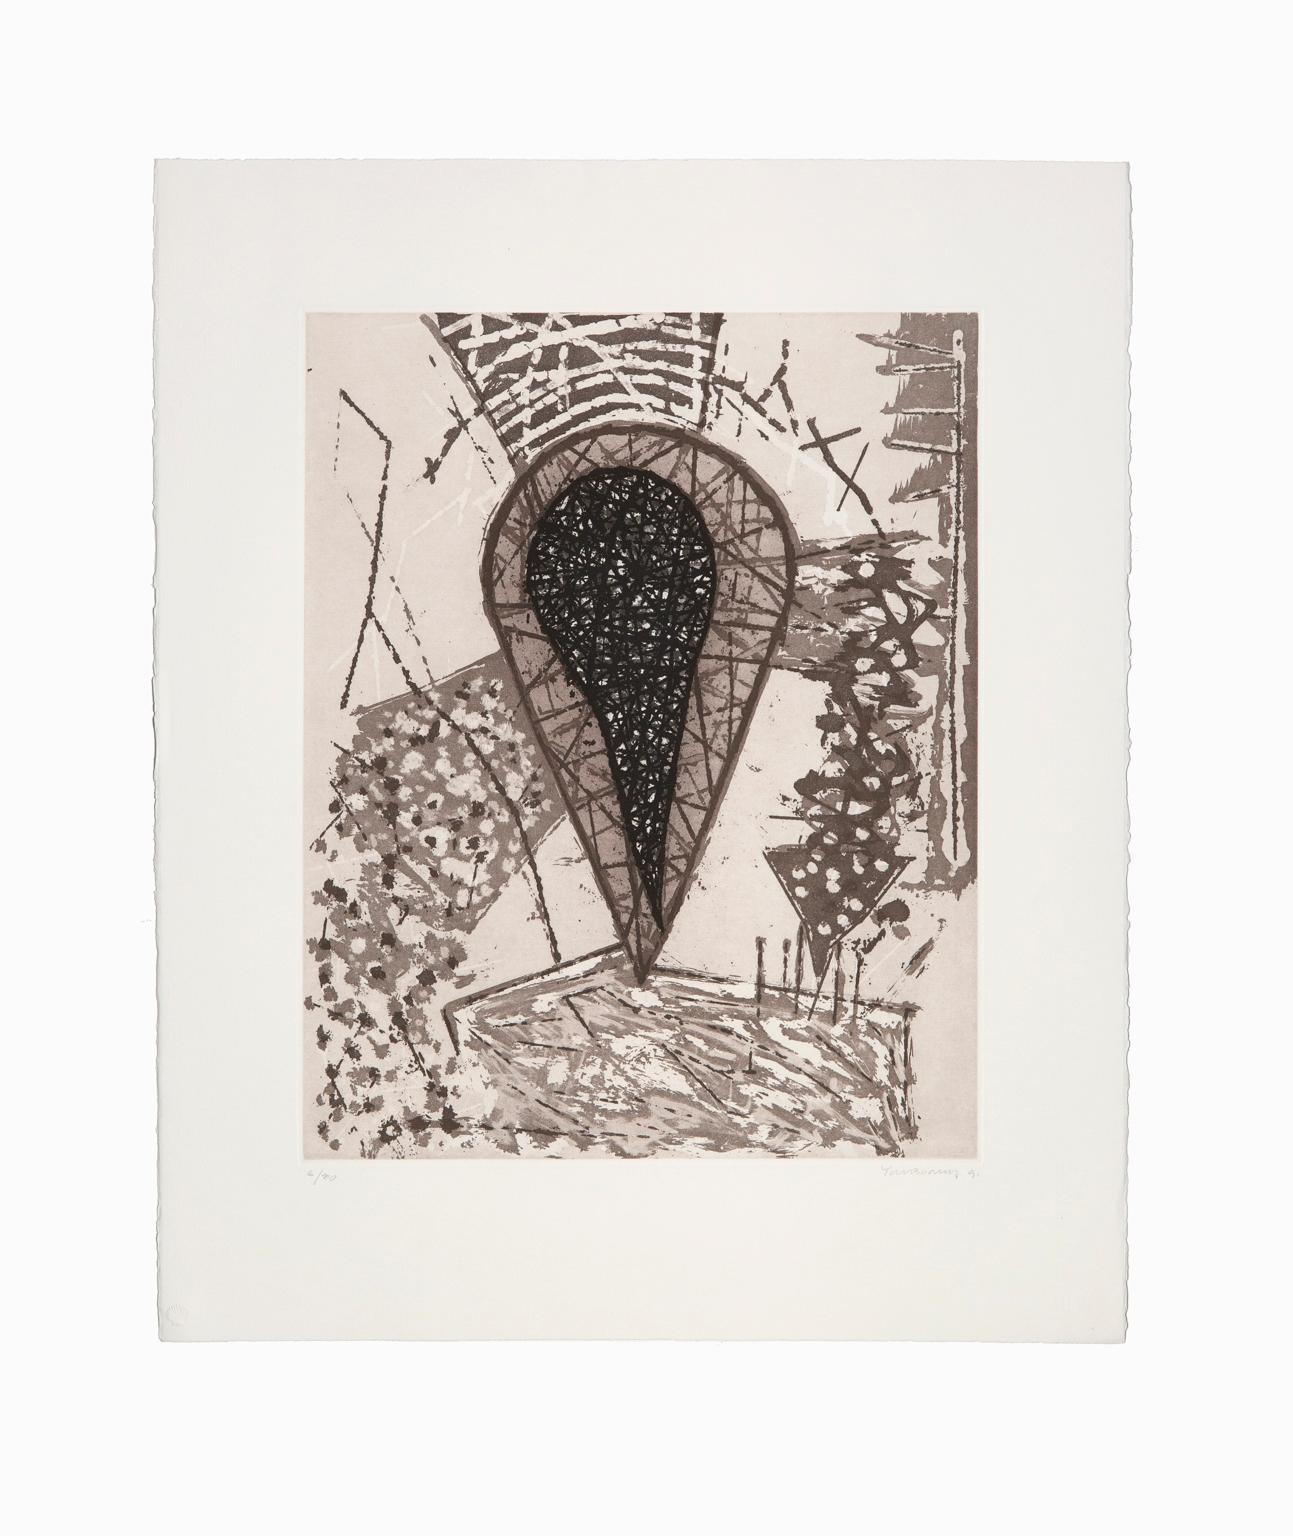 Bert Yarborough Abstract Print - "Untitled II", Abstract Etching and Aquatint Lithograph, Signed and Numbered